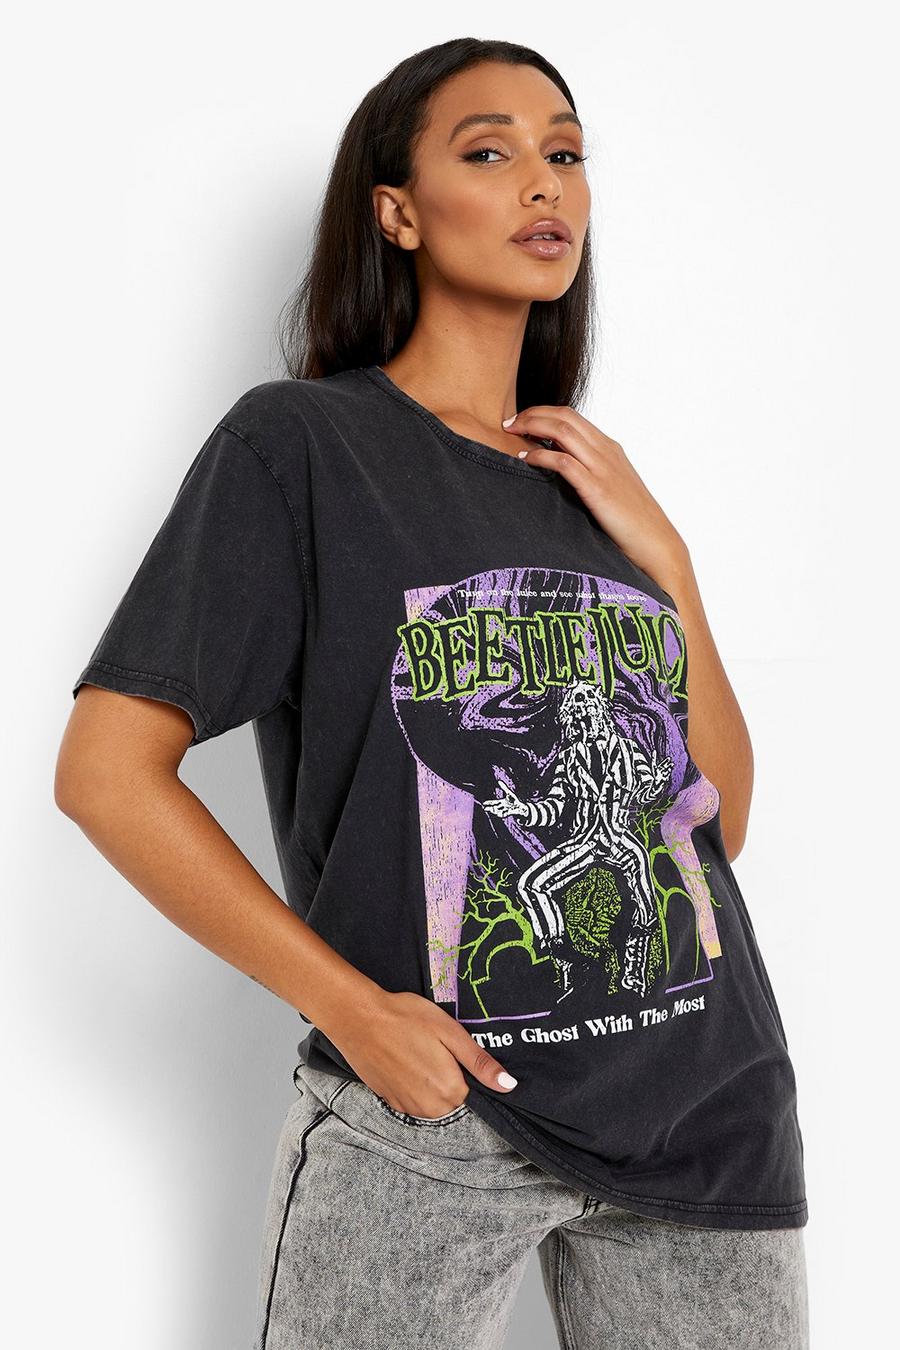 T-shirt di Halloween con stampa ufficiale di Beetlejuice, Charcoal image number 1